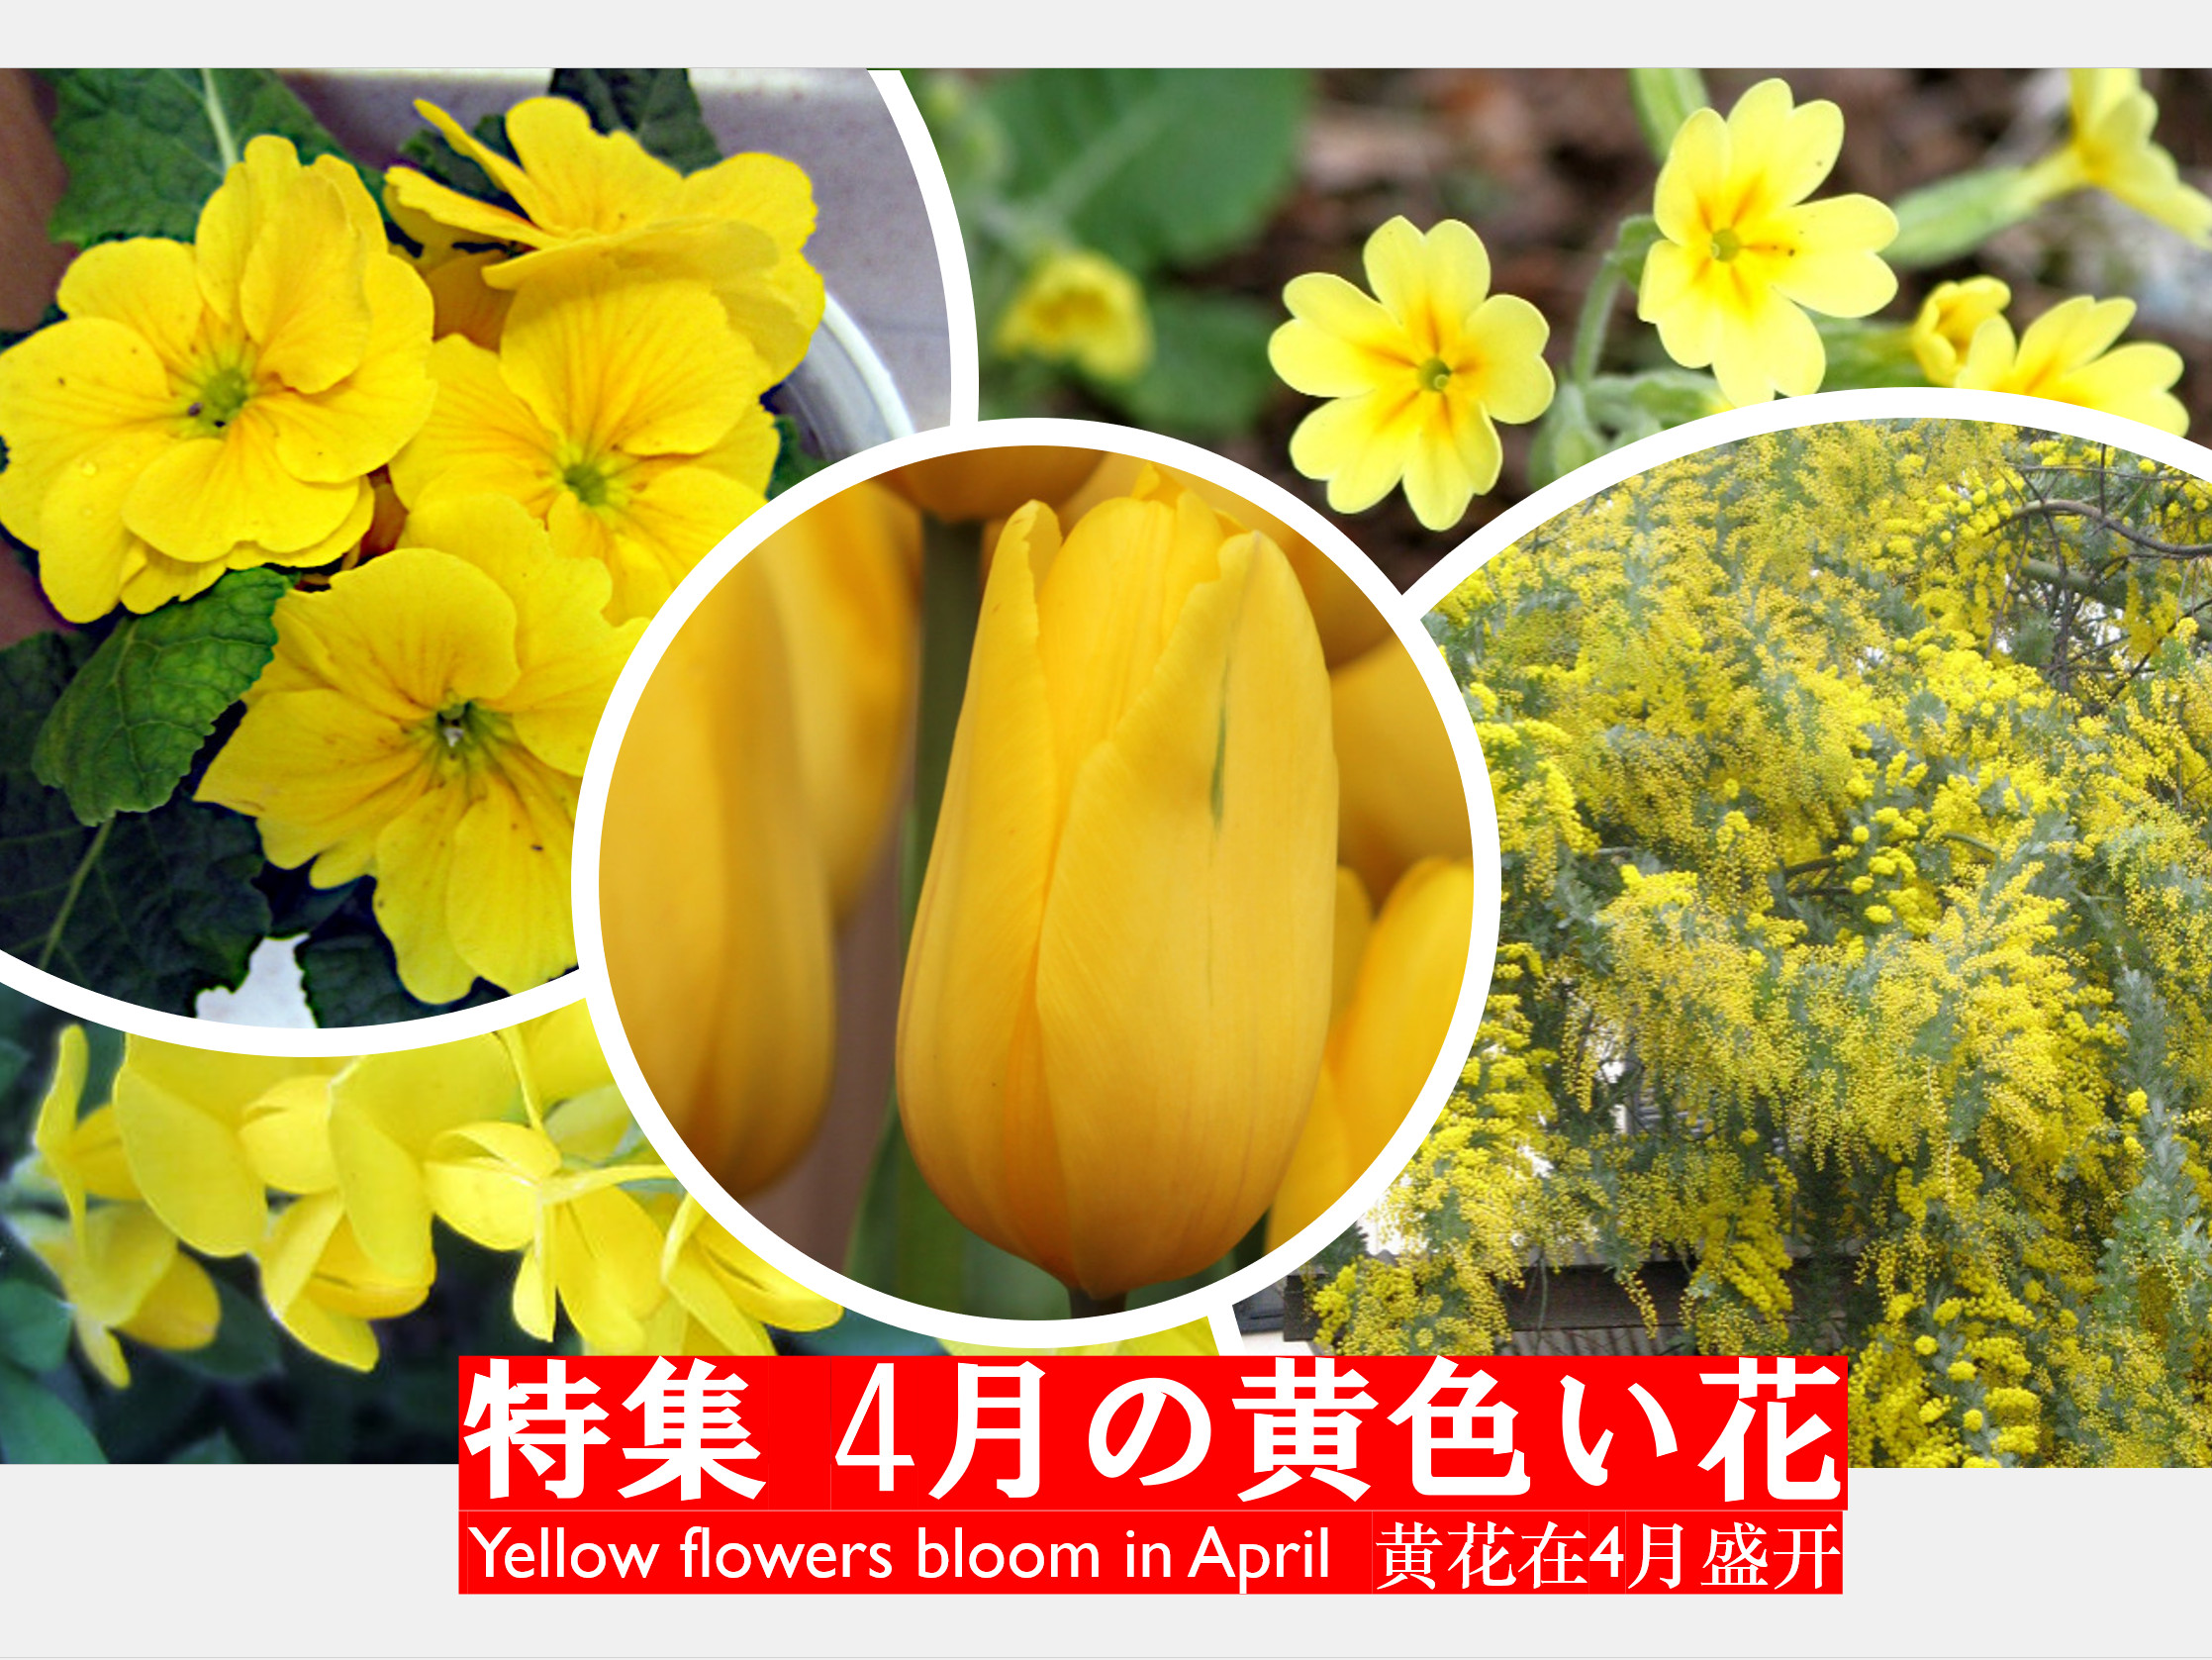 Yellow flowers bloom in April